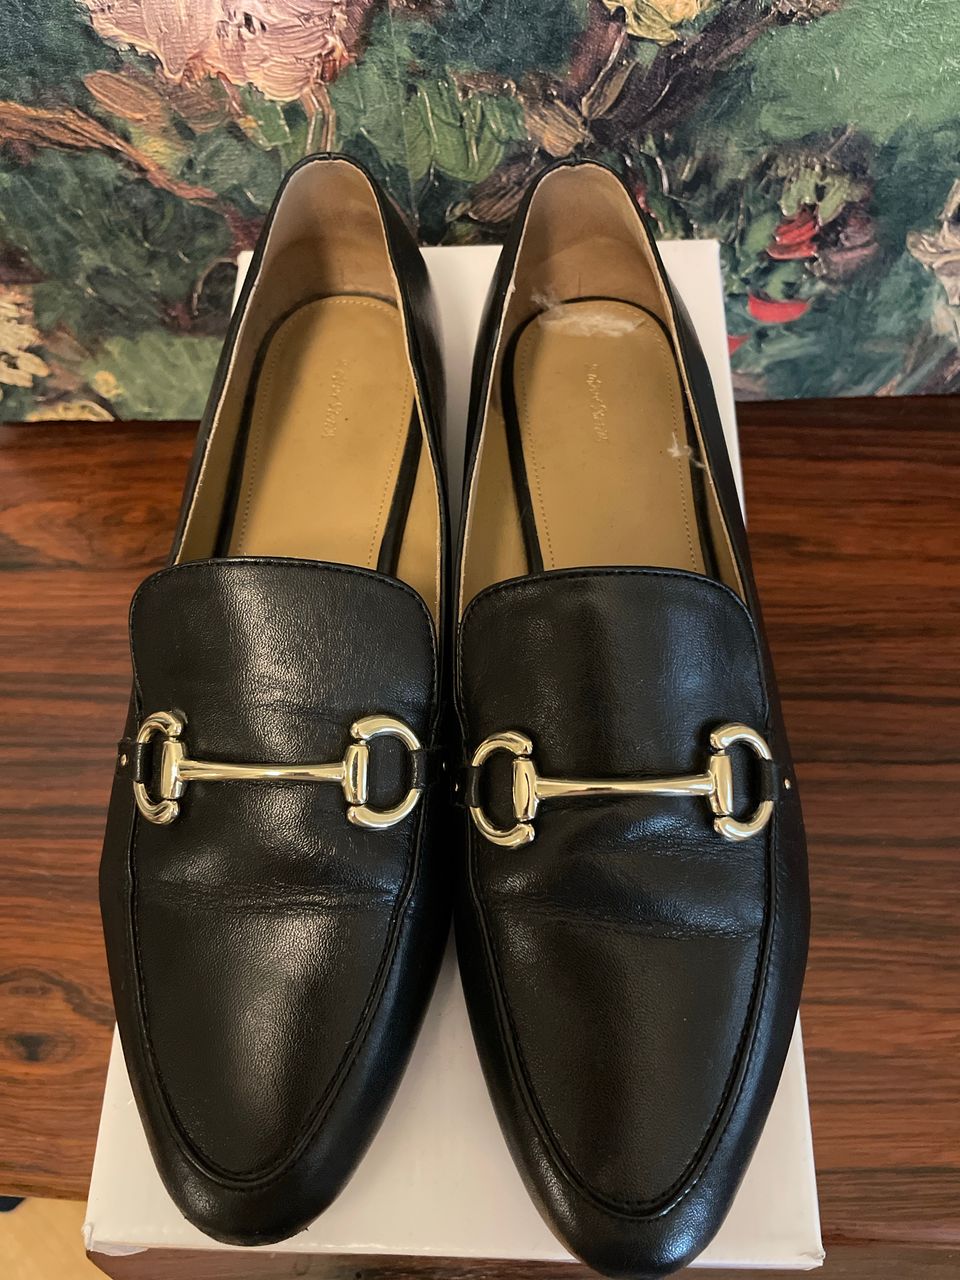 &Other Stories equestrian buckle loaferit